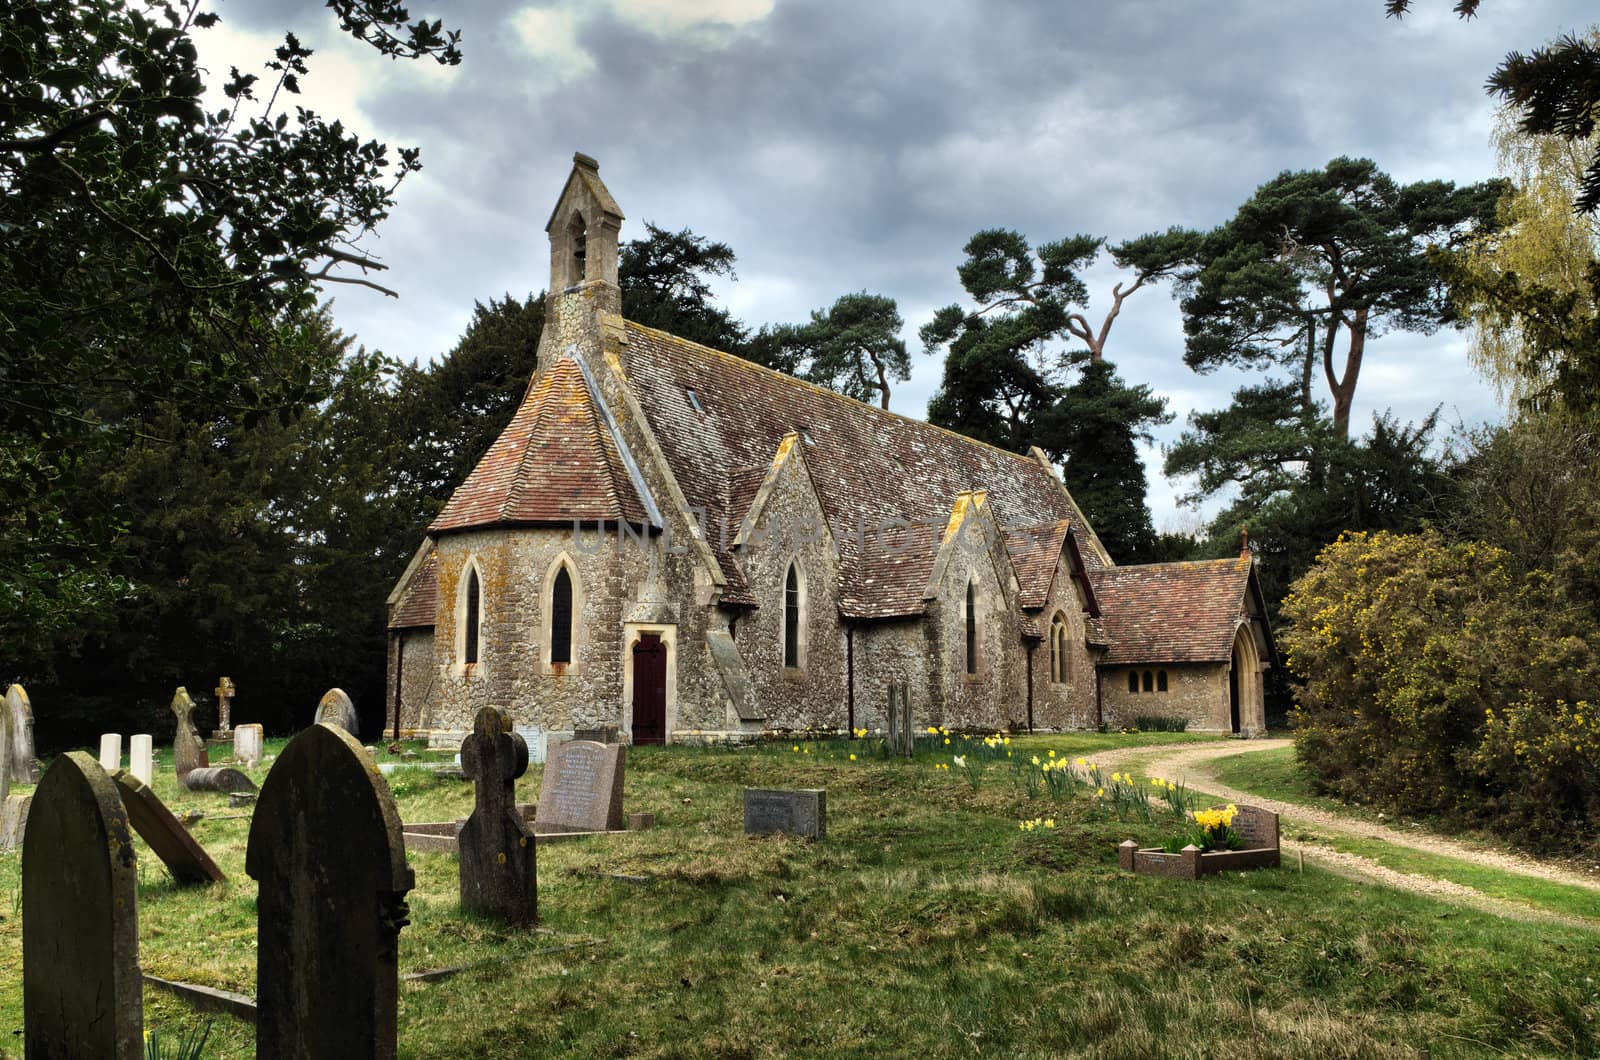 Holy Trinity Church, Charing Heath UK.
Small Victorian Church built of stone in 1874.
Apsidal end with Bellcote and Lancet windows